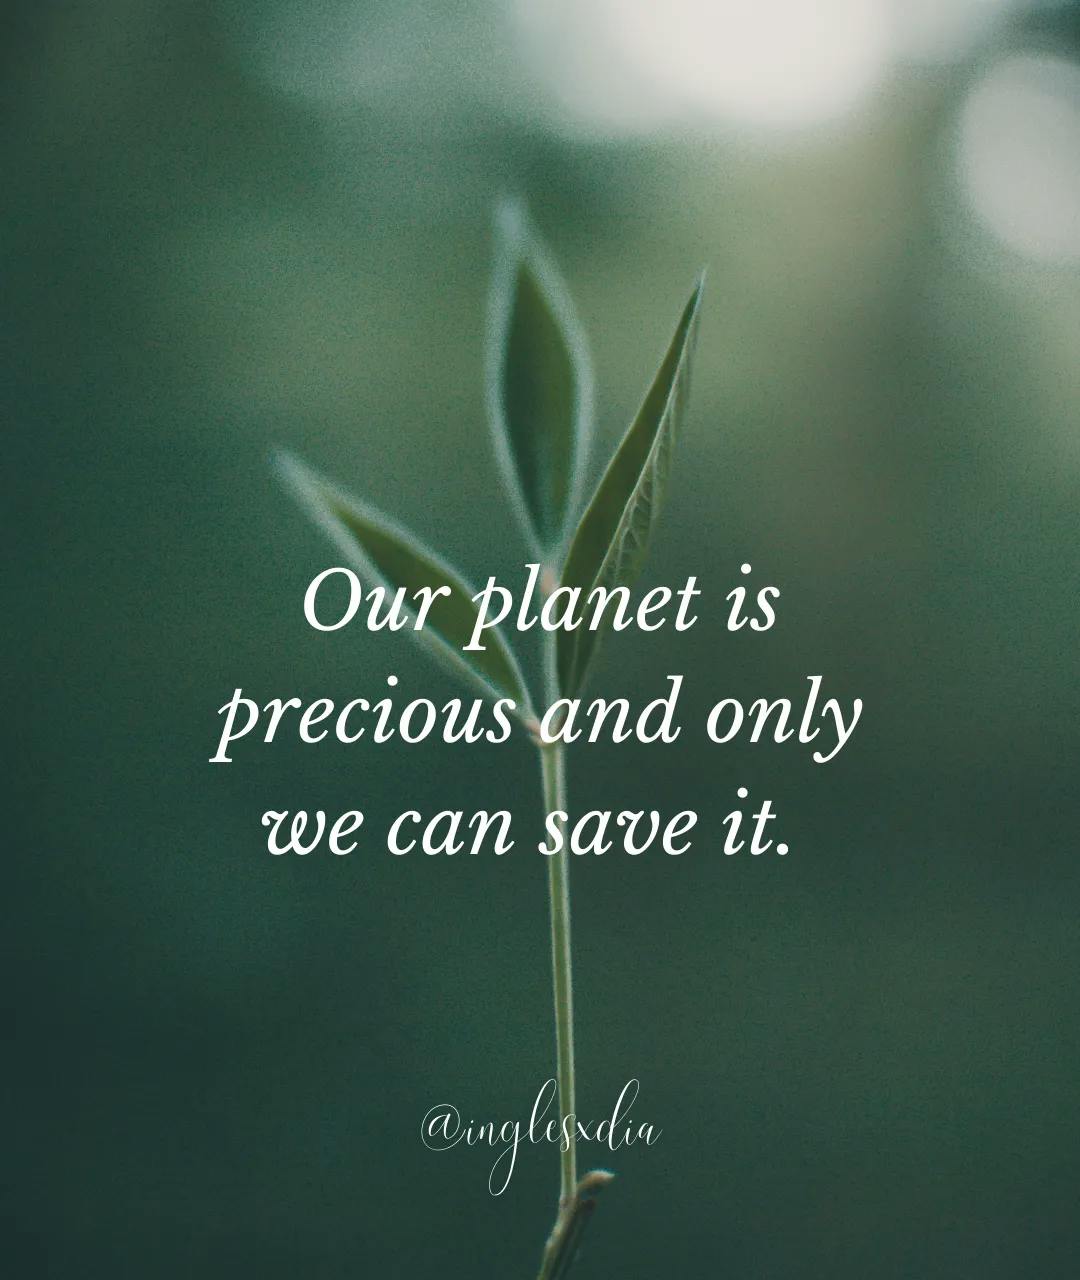 Our planet is precious...